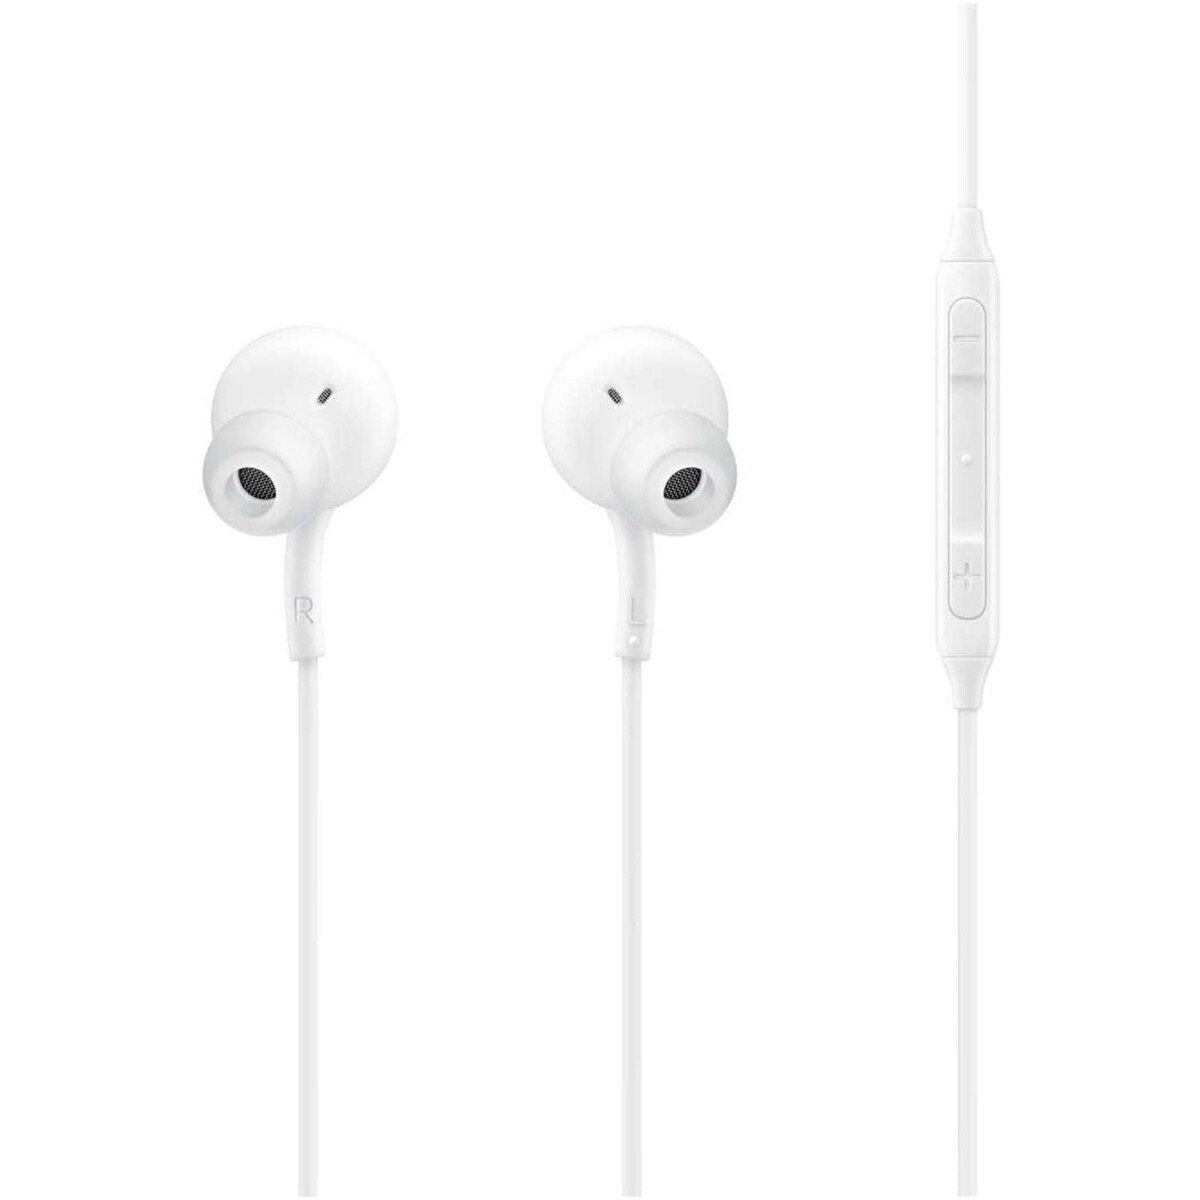 Samsung Stereo (White) | Price Kuwait Mobile Best Hands | Type-C In-Ear at Free Online EO-IC100 Lulu Earphones